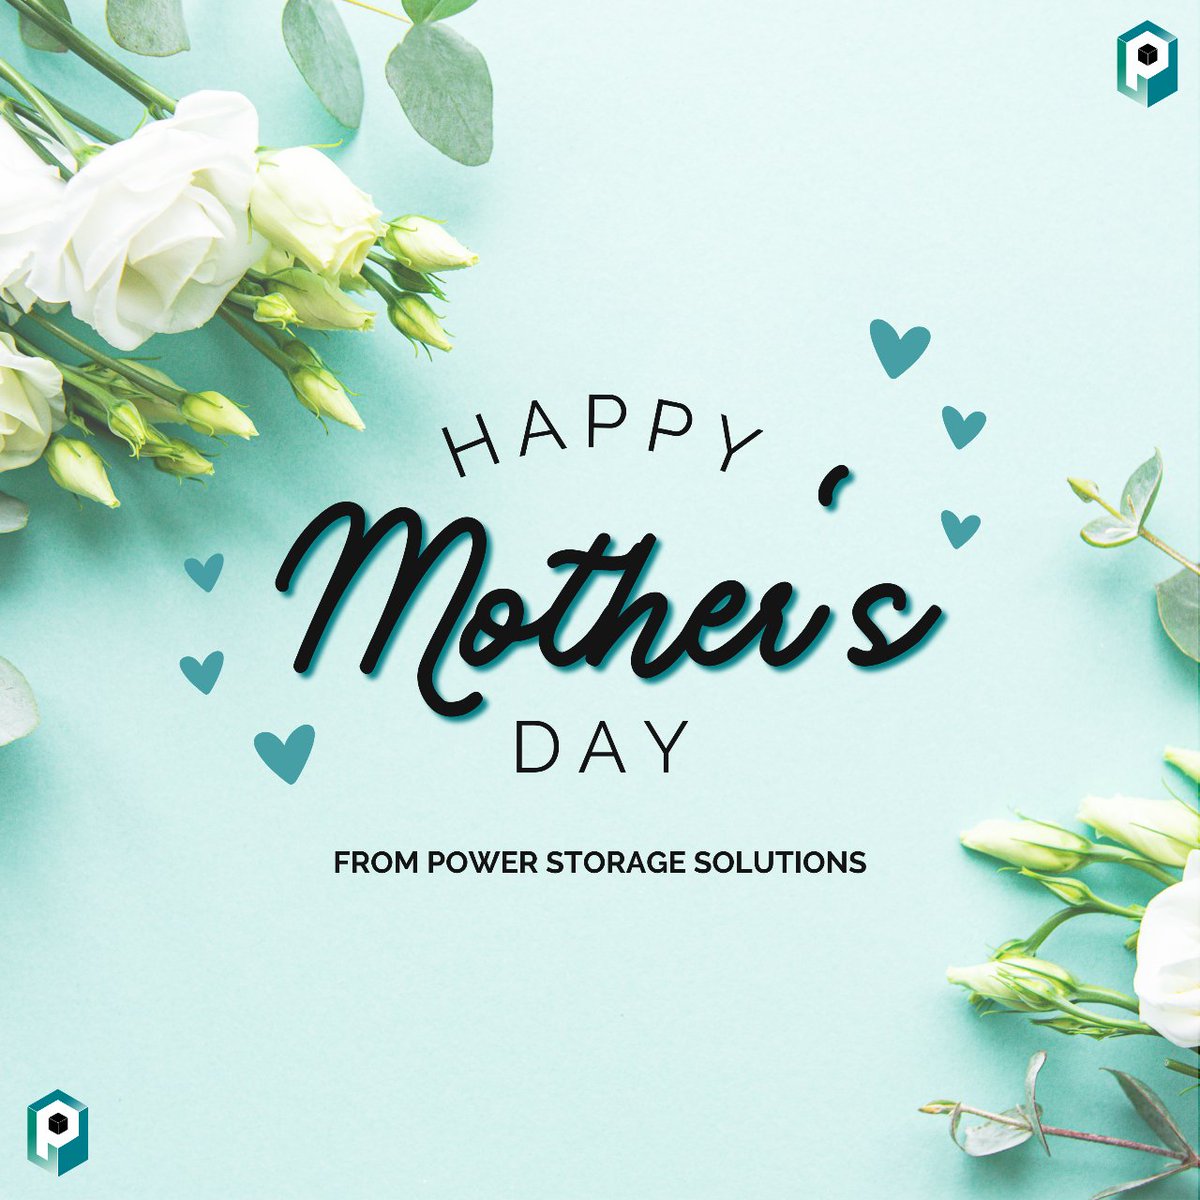 This Mother's Day, let's celebrate the incredible women who inspire us every day and commit to building a more sustainable world for generations to come. #HappyMothersDay #PowerStorageSolutions #PowerStorage